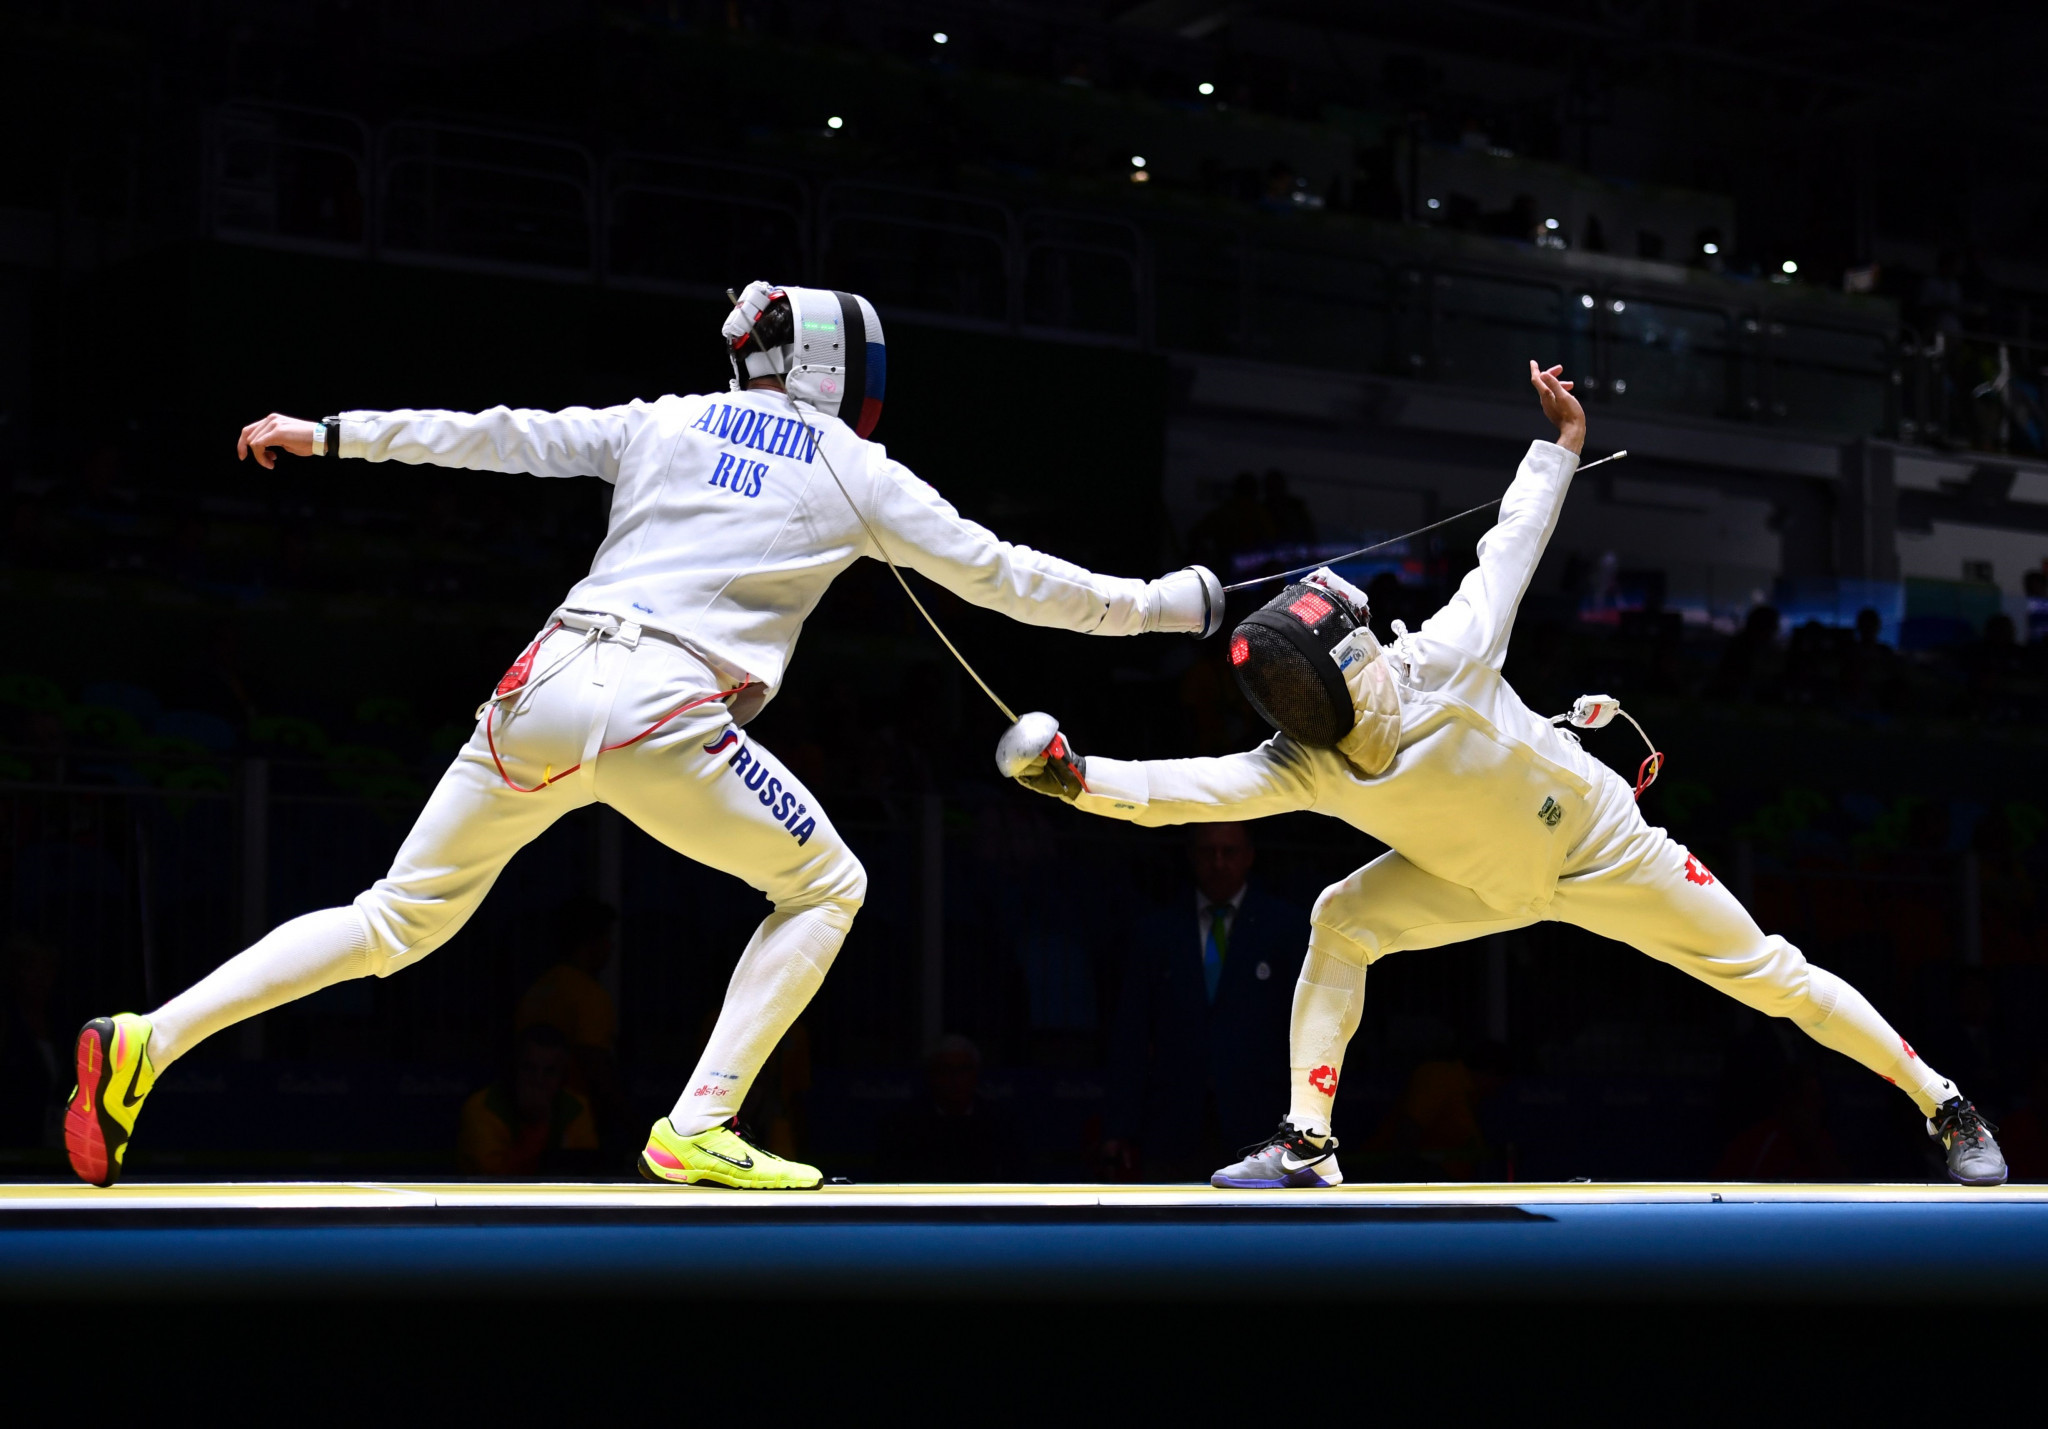 Russian and Ukrainian fencers head to Milan for World Championships